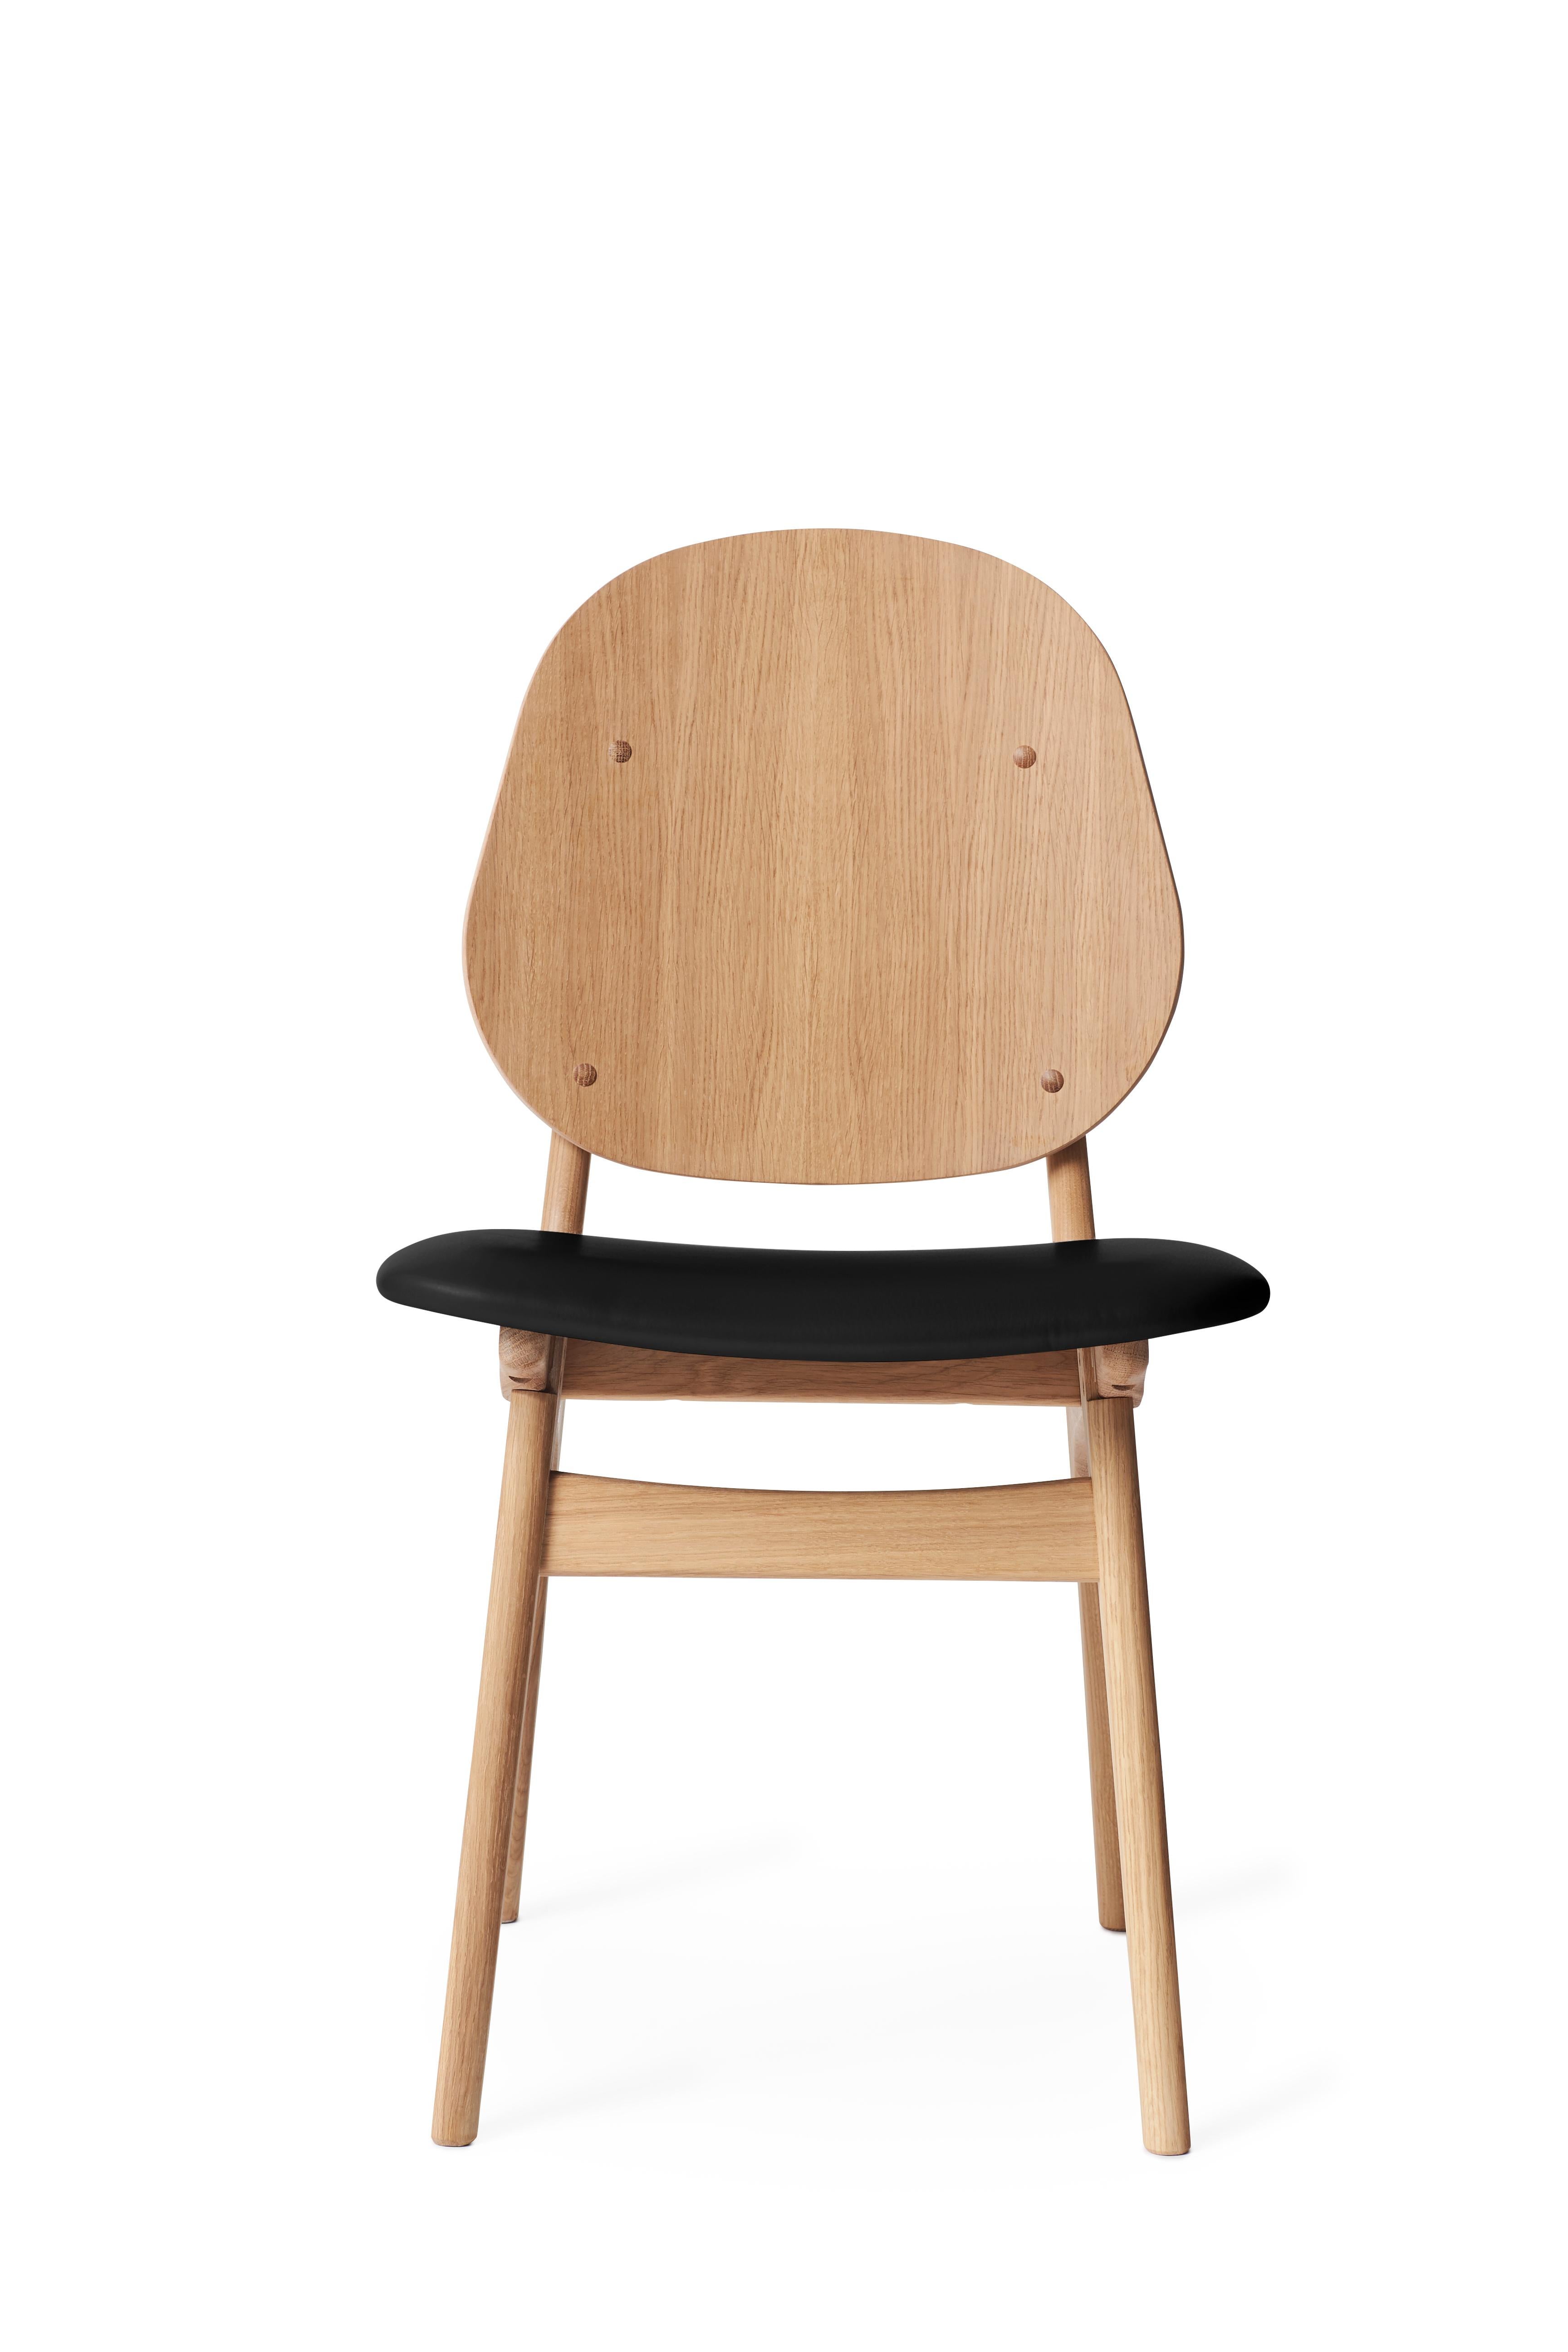 For Sale: Black (Prescott 207) Noble Chair in Oak with Upholstery, by Arne Hovmand-Olsen from Warm Nordic